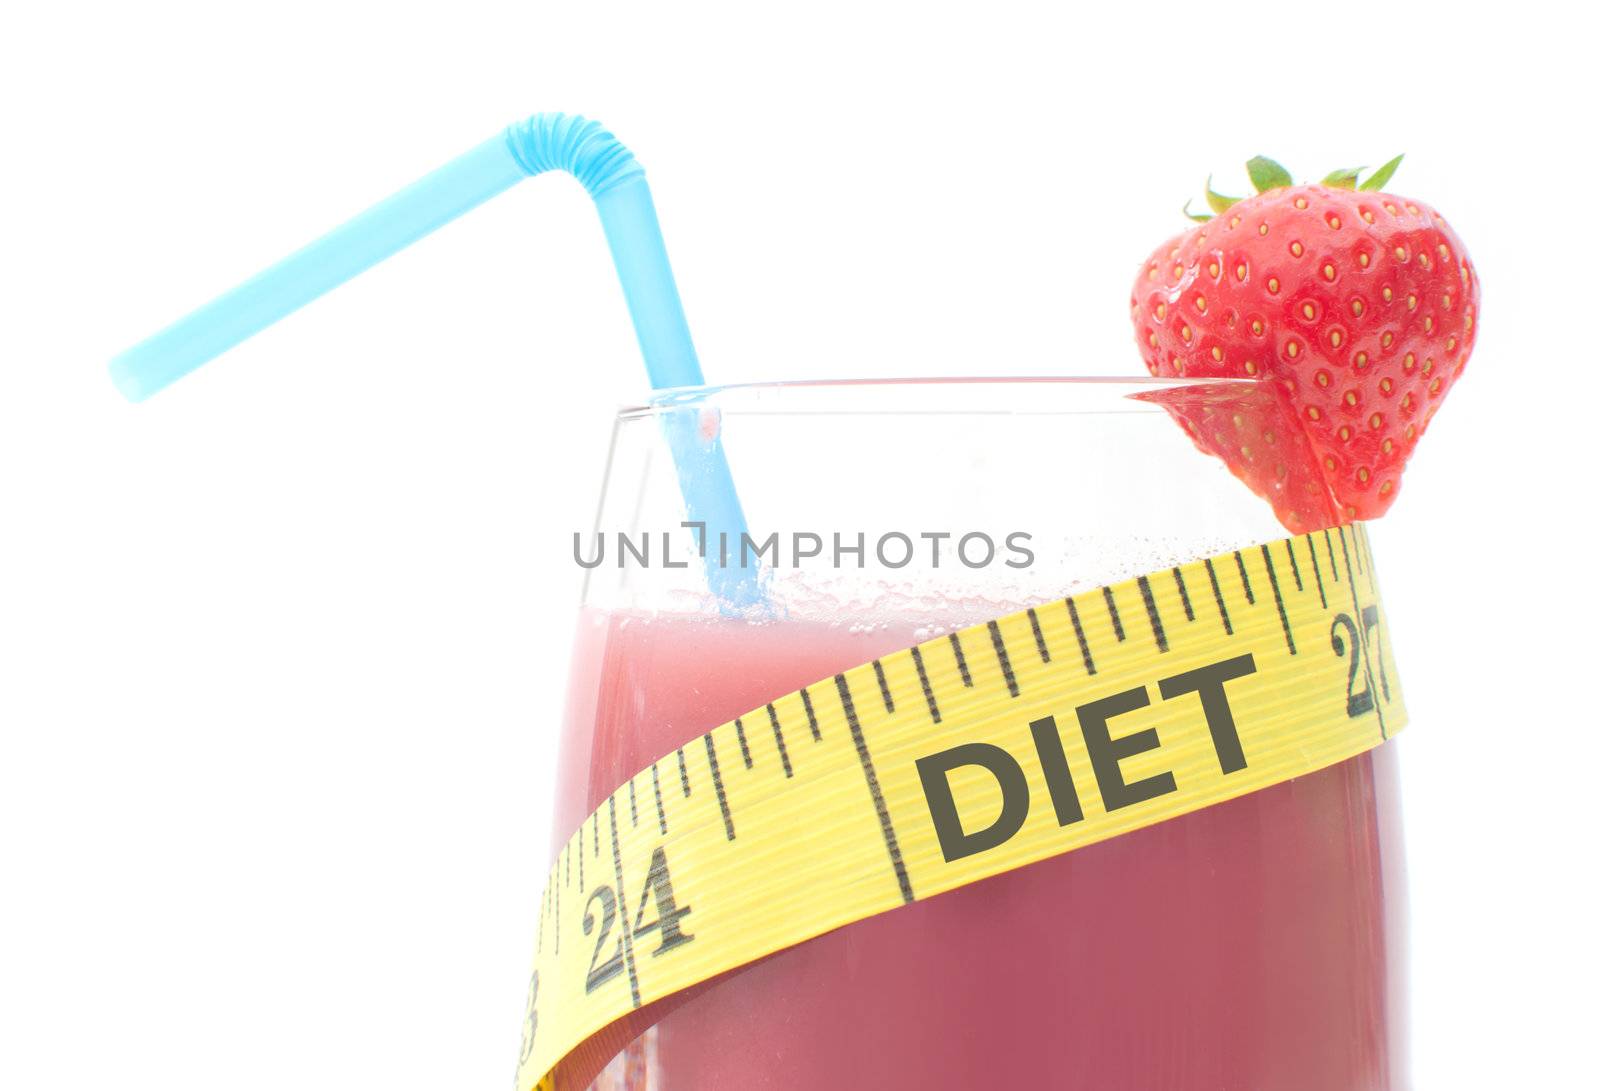 The word diet inscribed on a measuring tape wrapped around a healthy smoothie